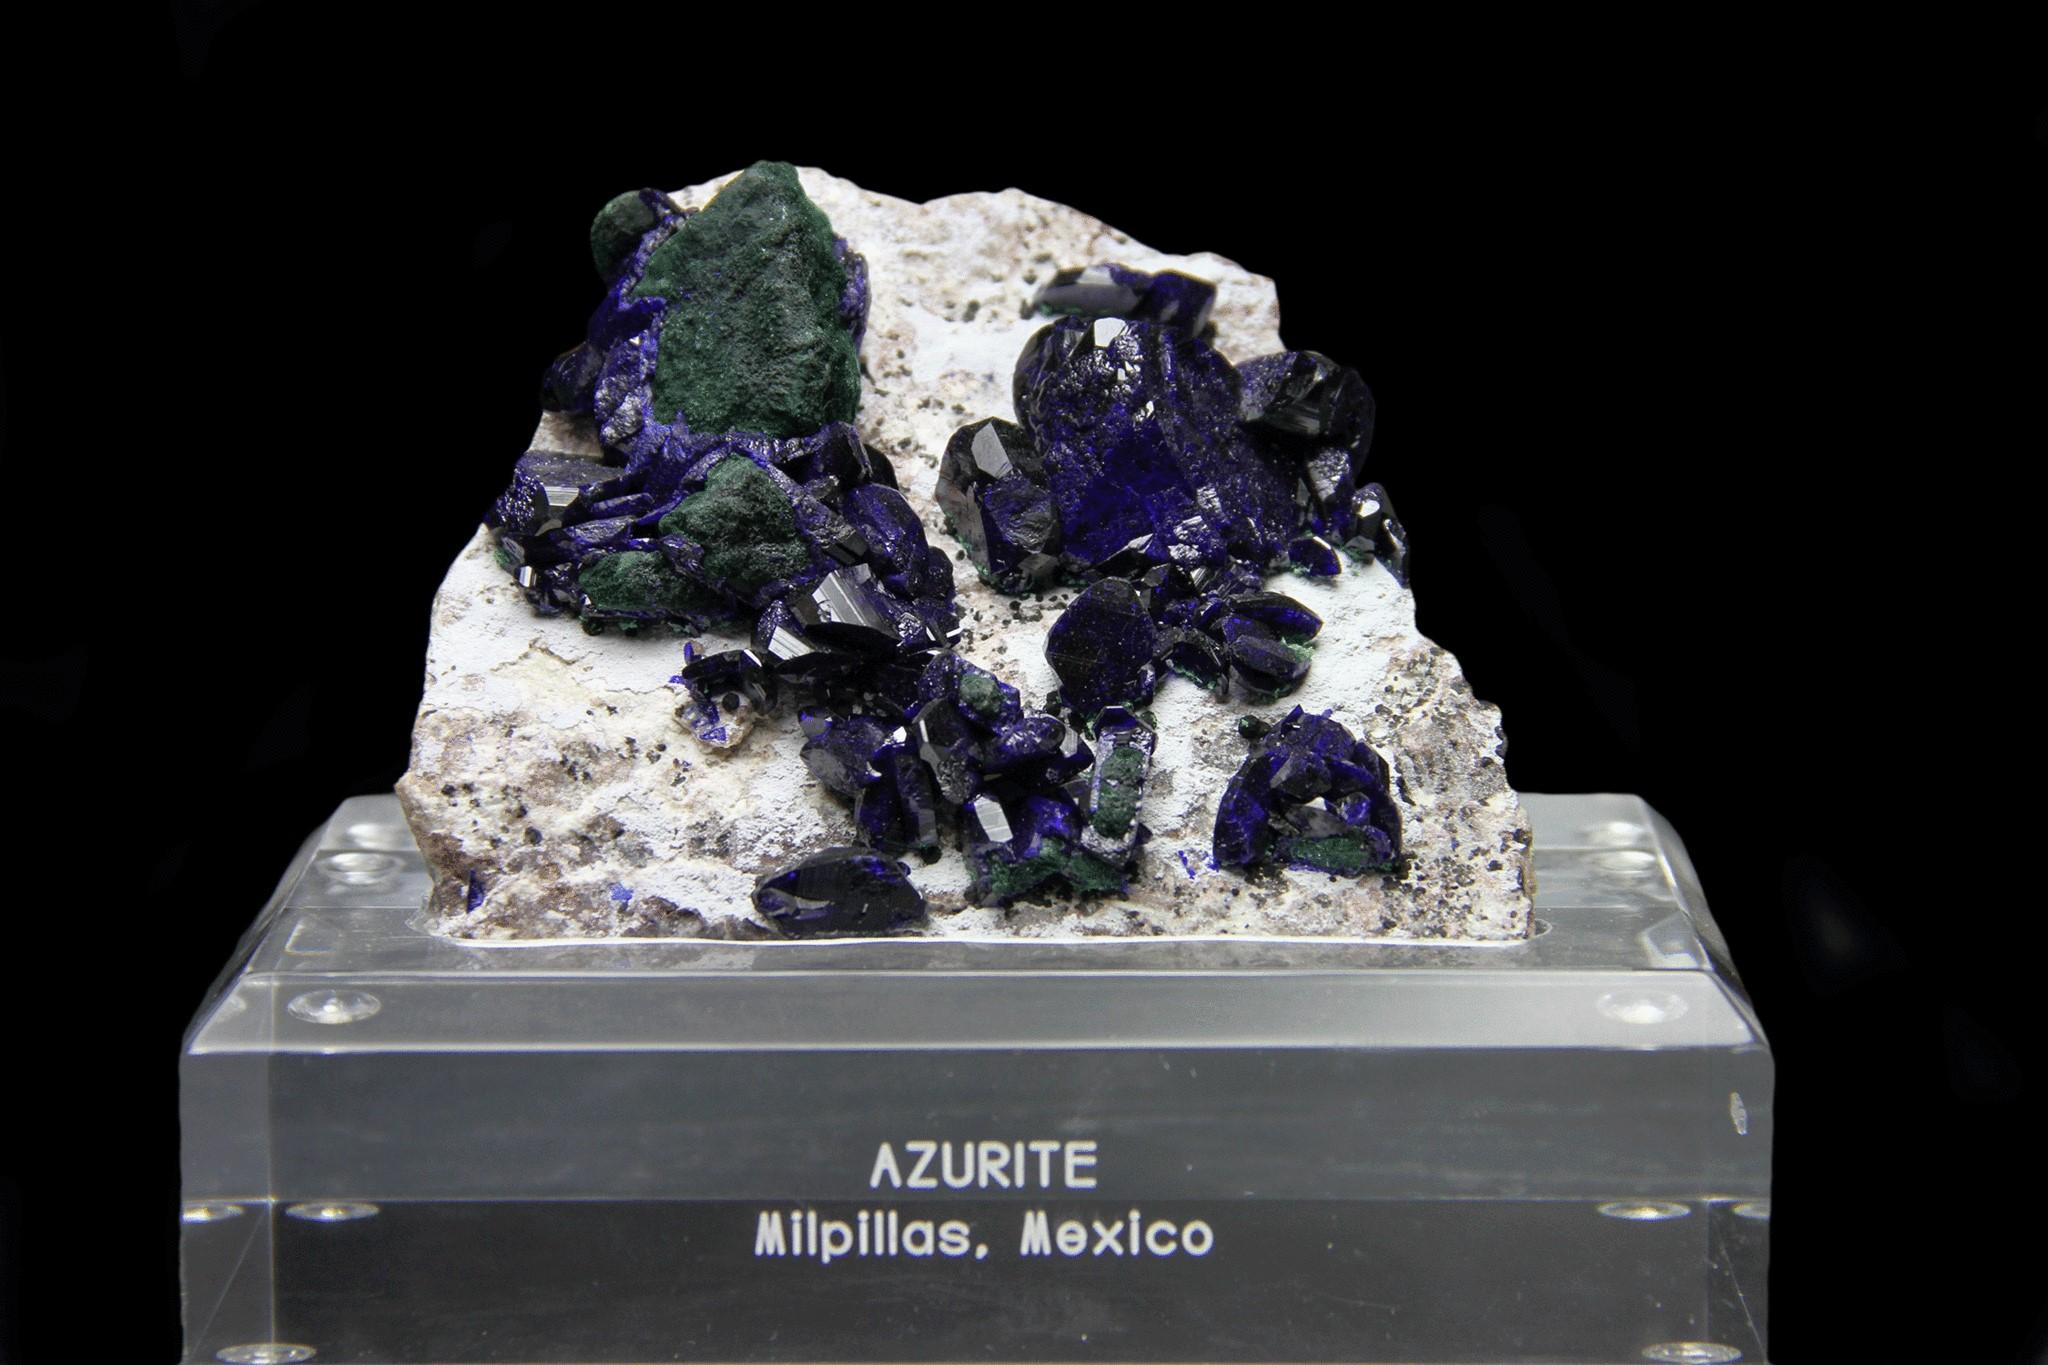 From Milpillas Mine, Cuitaca, Sonora, Mexico

Lustrous transparent dark-royal blue Azurite crystals on contrasting matrix of white clay. Large pseudomorphic crystal of malachite after azurite, several alterations can be seen throughout the